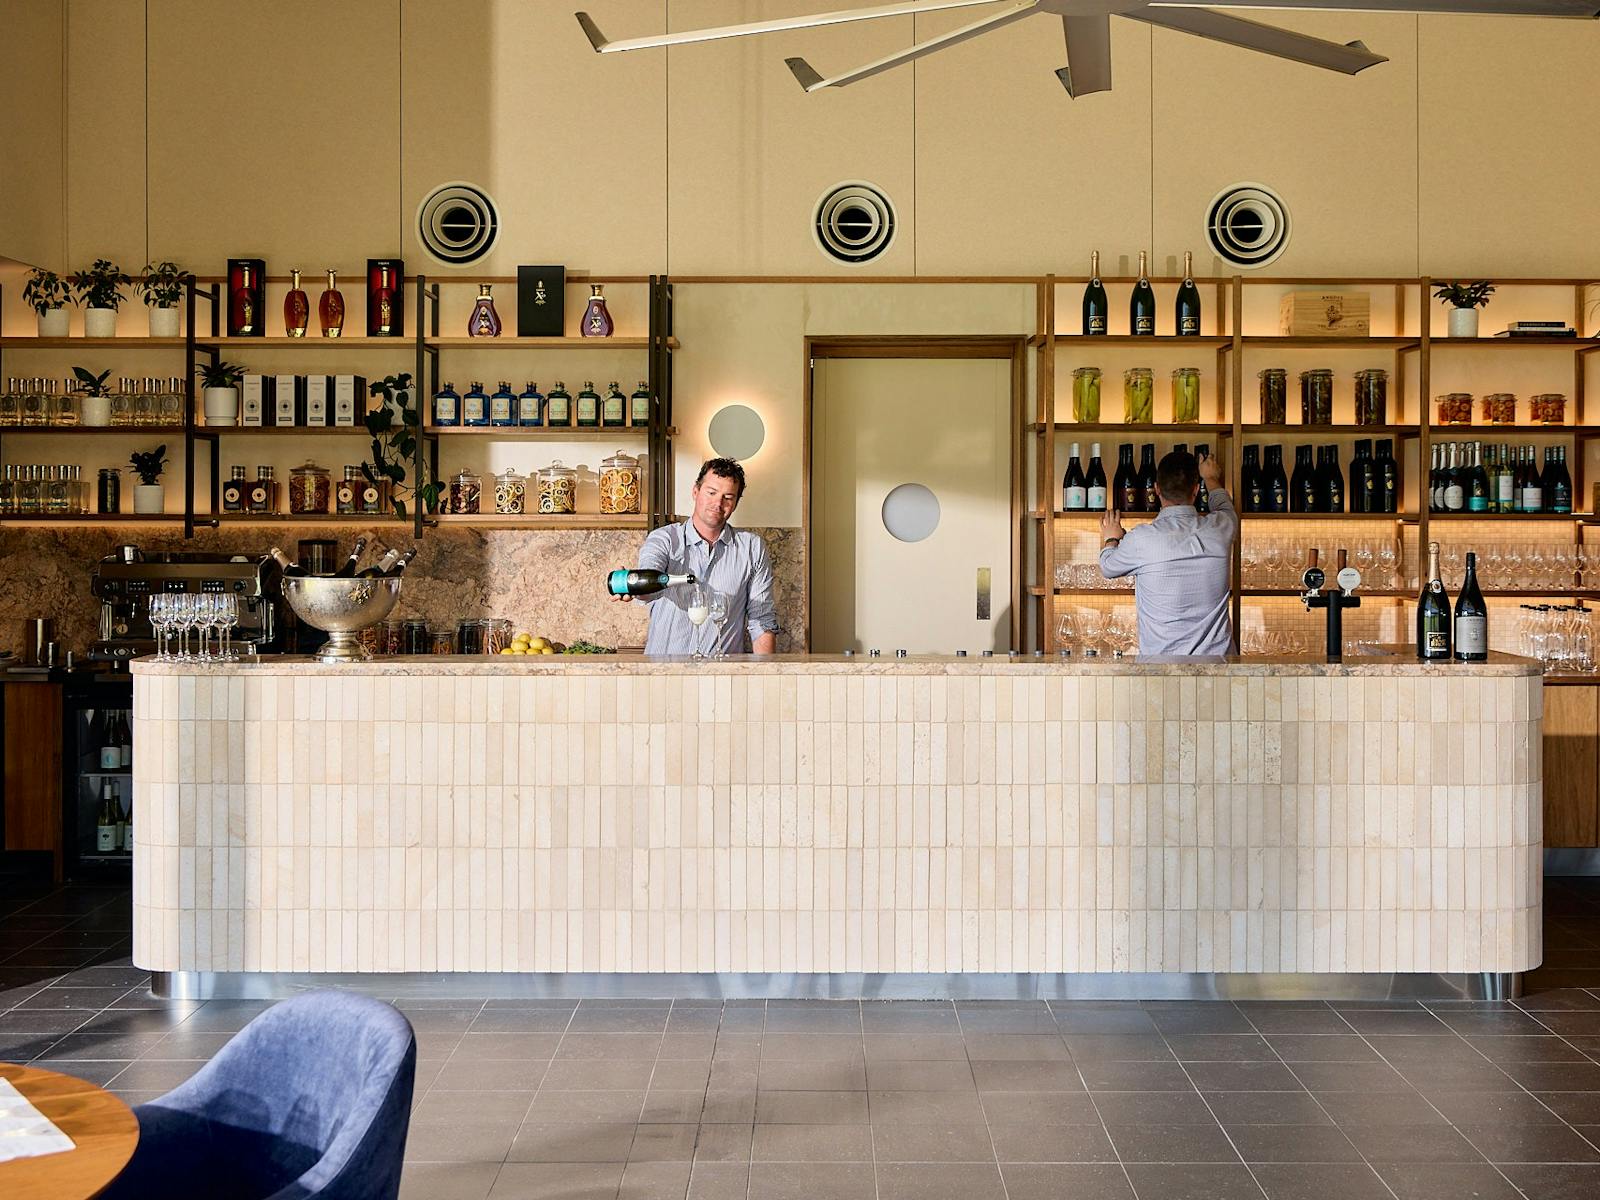 Enjoy some drinks in our newly renovated bar, overlooking our Warboys vineyard in McLaren Vale